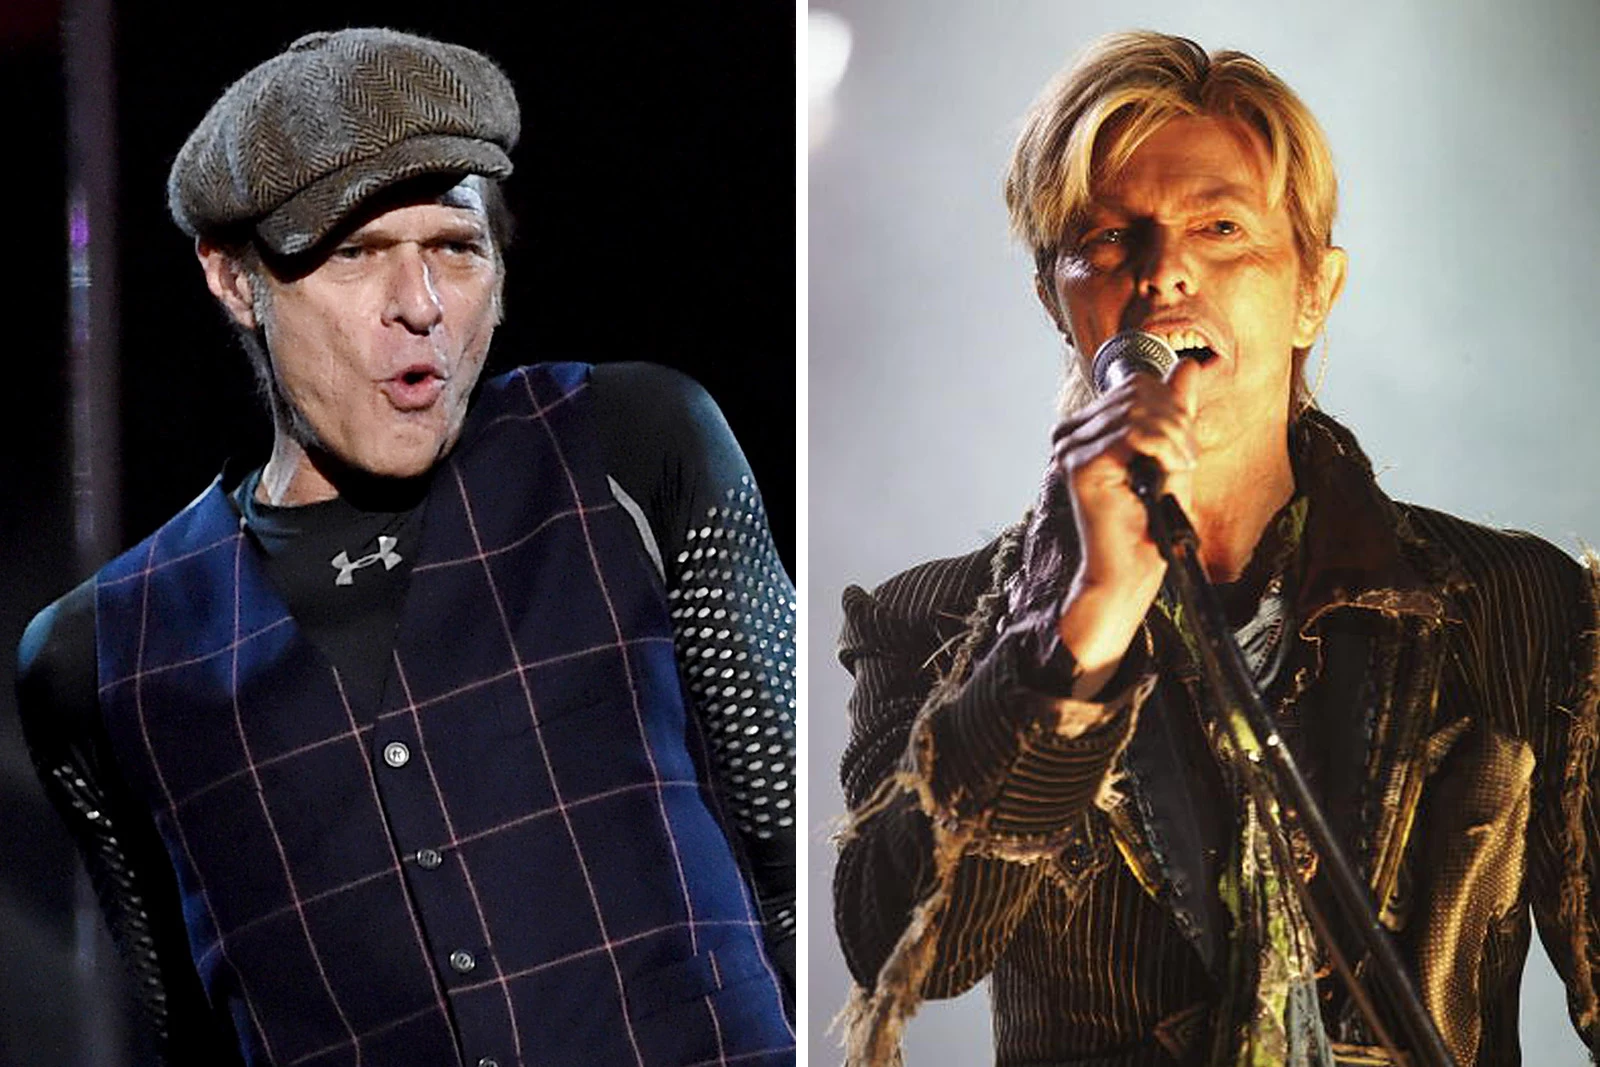 David Lee Roth Recalls Furniture Call From David Bowie